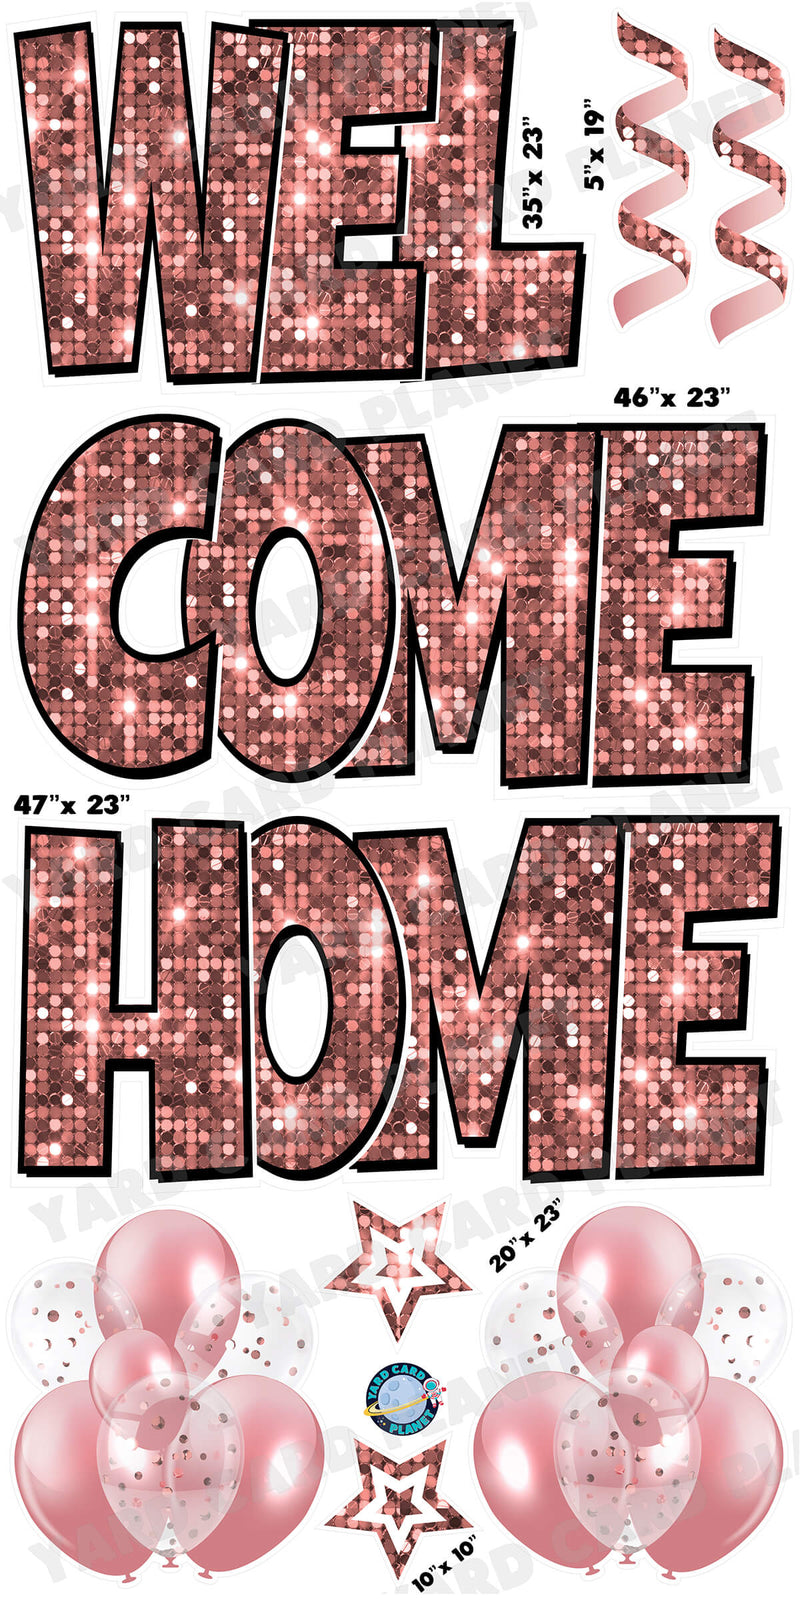 Large 23" Welcome Home Yard Card EZ Quick Sets in Luckiest Guy Font and Flair in Rose Gold Sequin Pattern